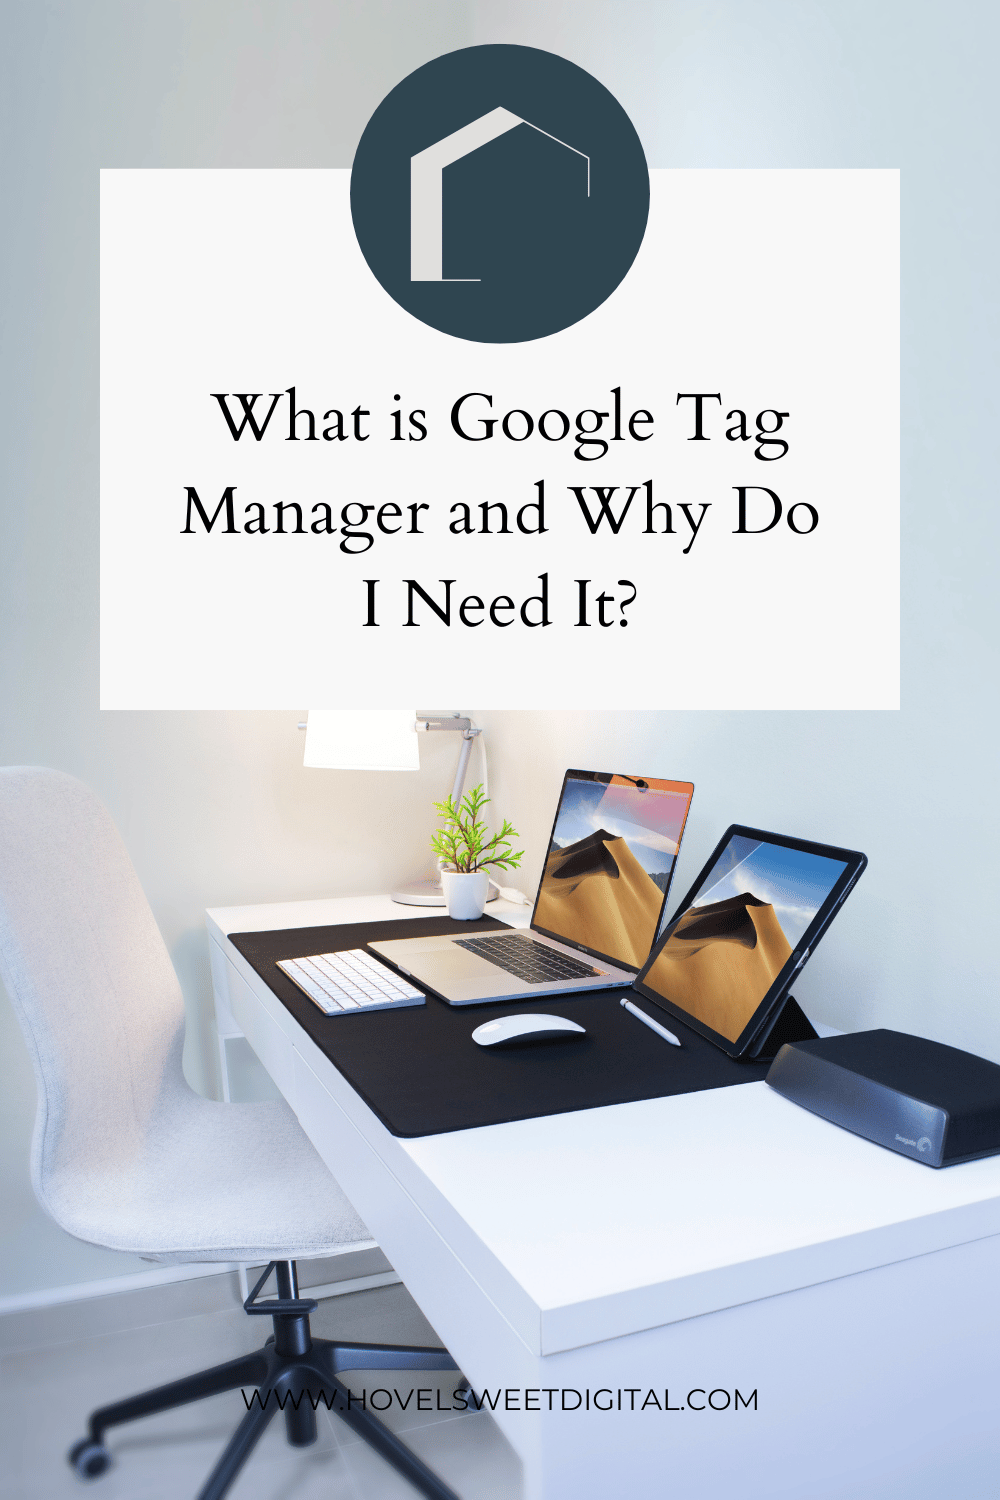 What is Google Tag Manager and Why Do I Need It